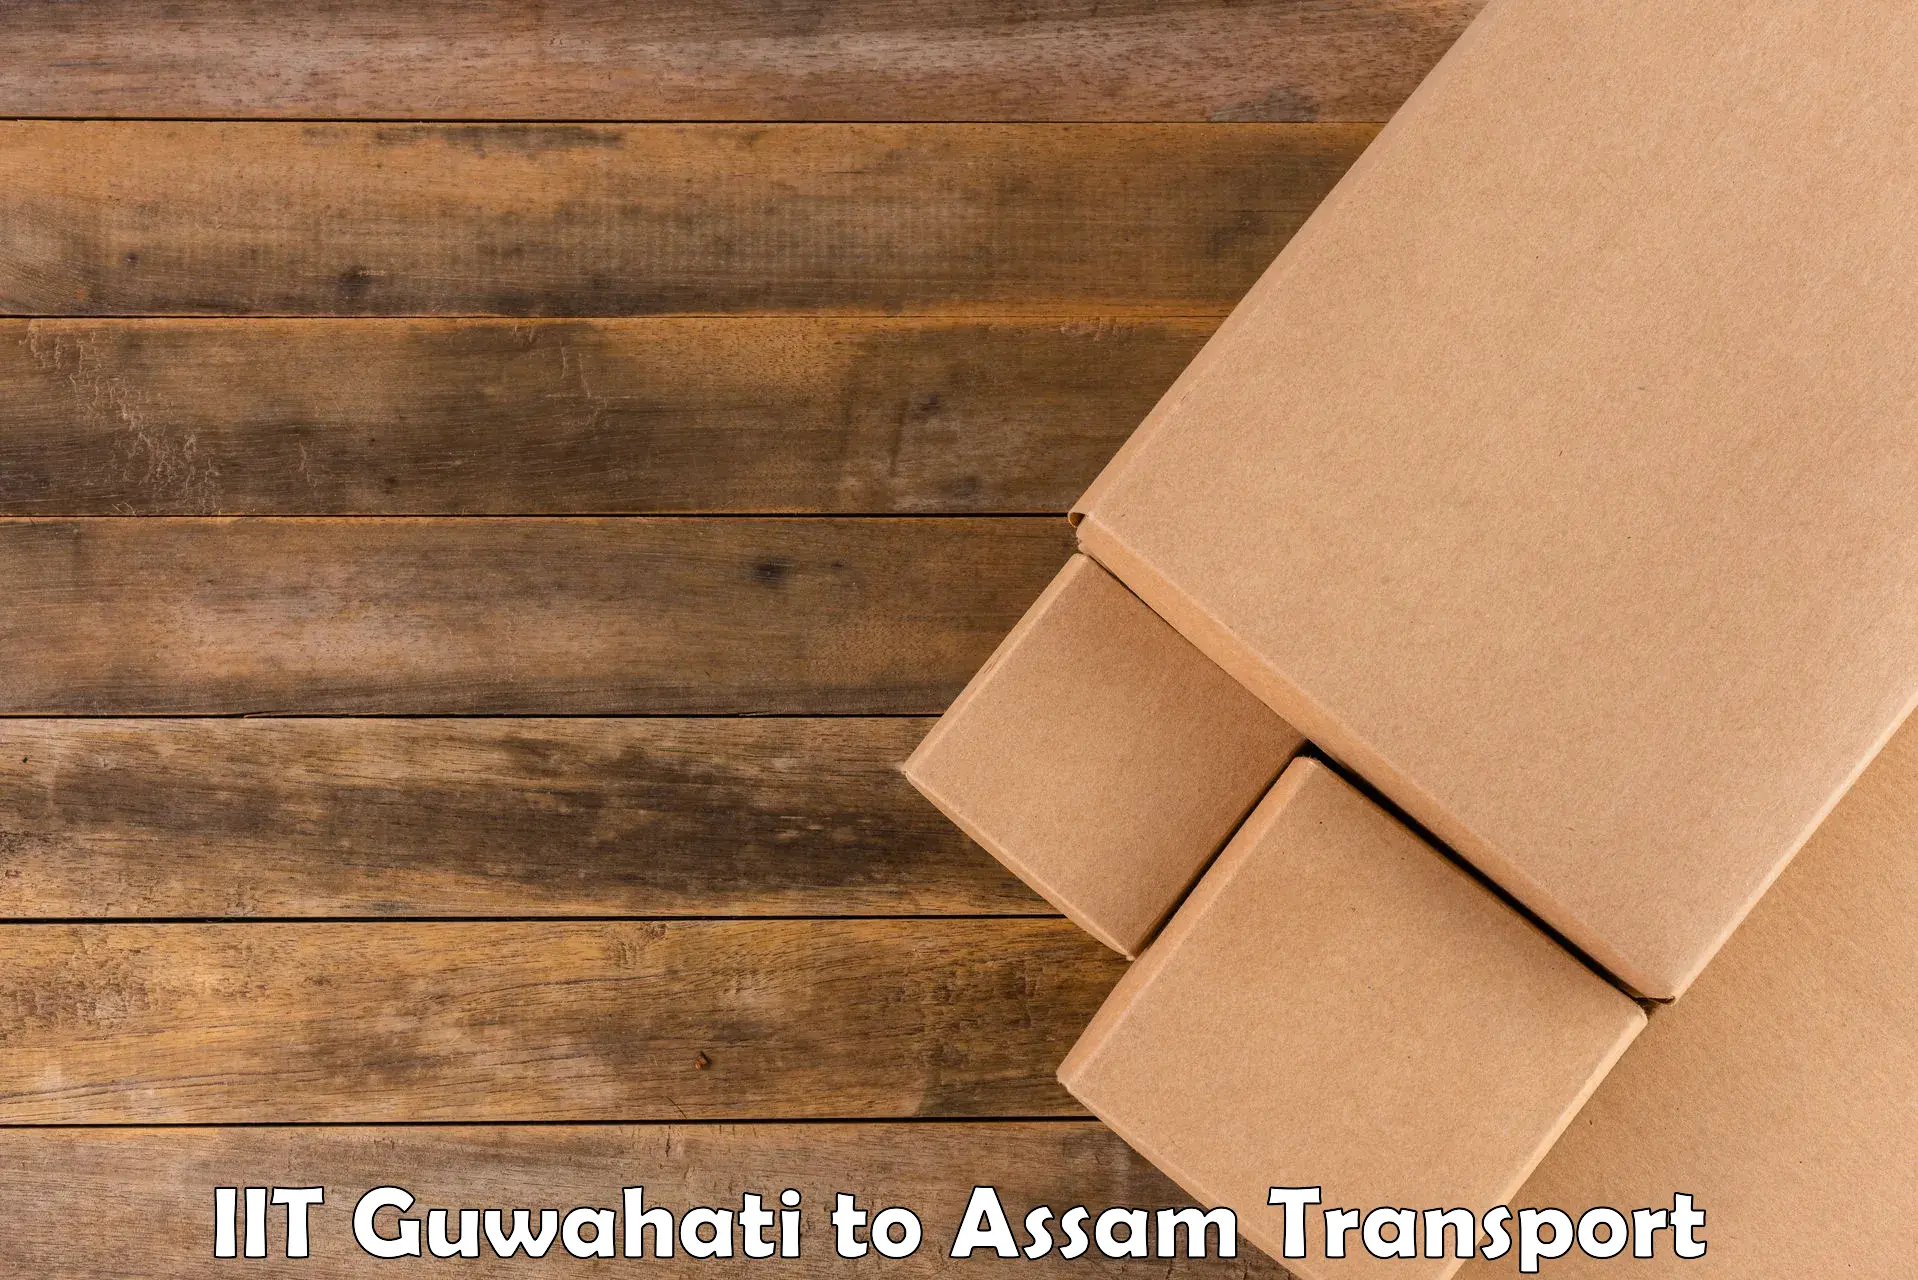 Container transport service IIT Guwahati to Demow